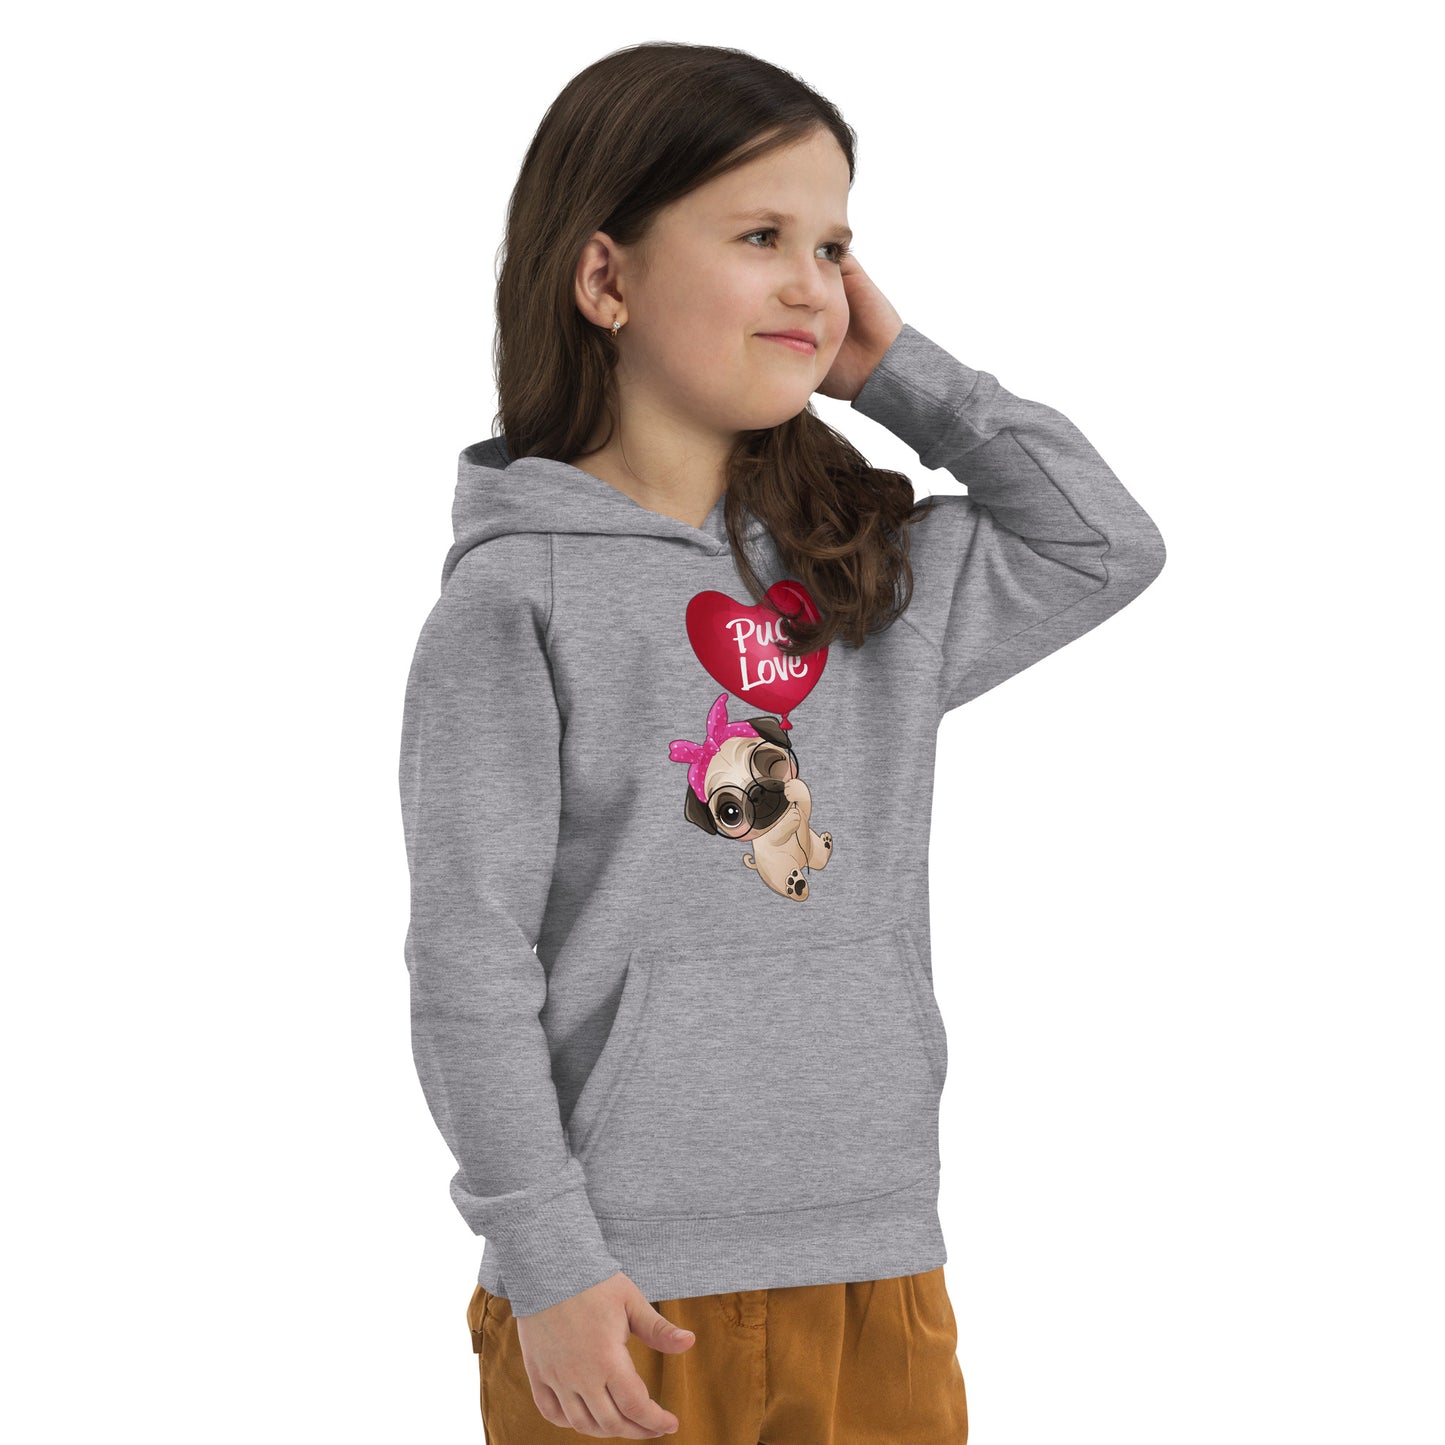 Puppy Pug Dog Flying with Balloon Hoodie, No. 0490